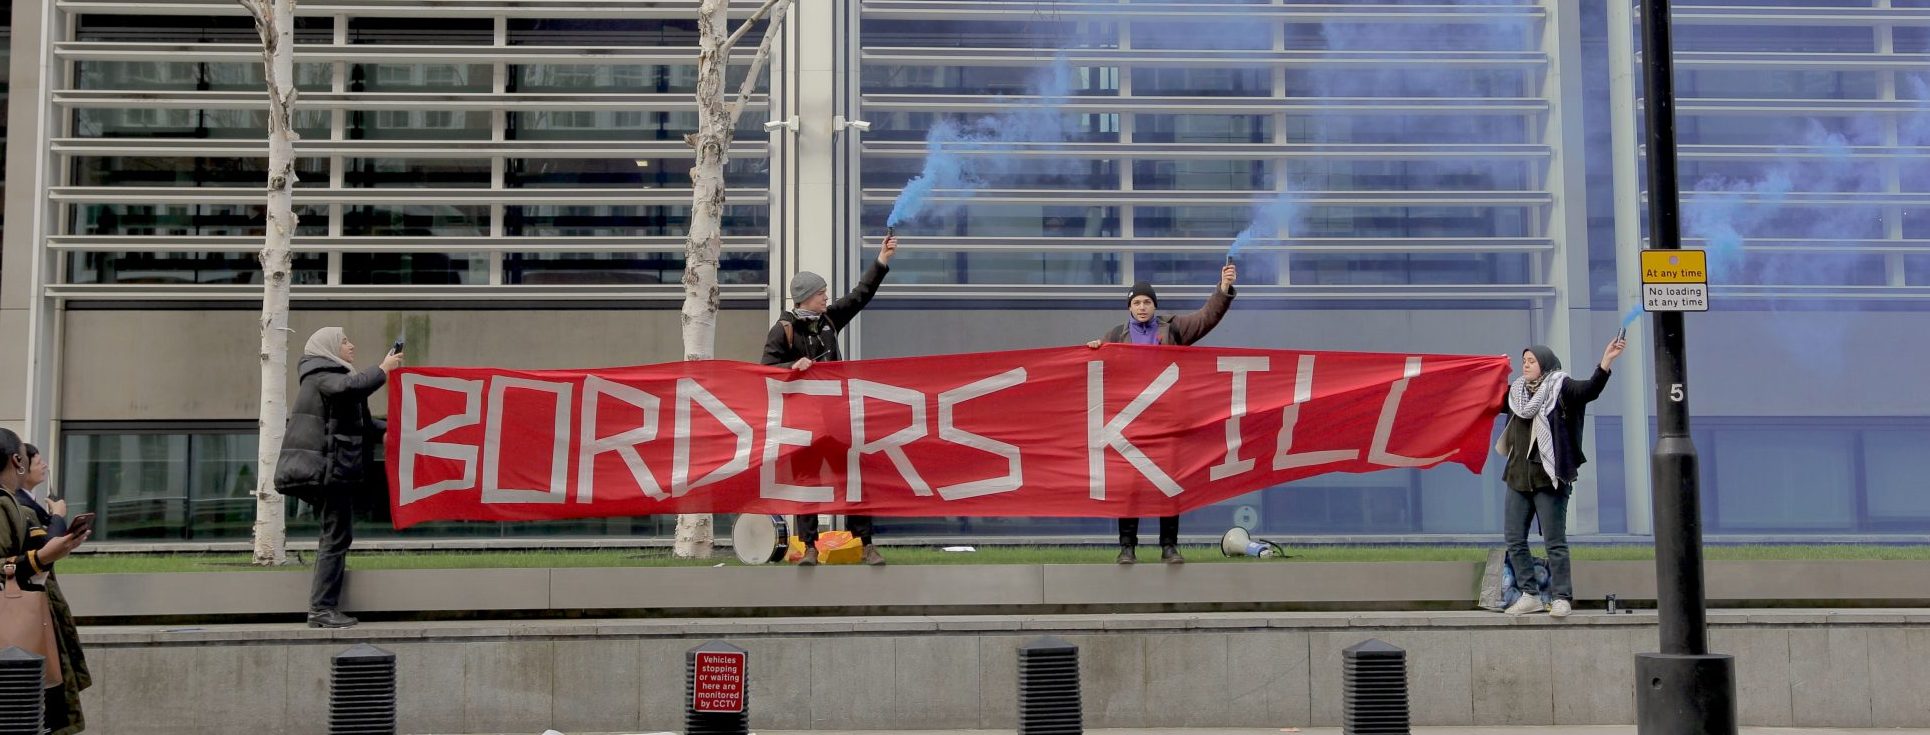 Borders Kill banner carried by four campaigners with hats and headscarfs outside Home Office. Three hold smoke pyrotechnics